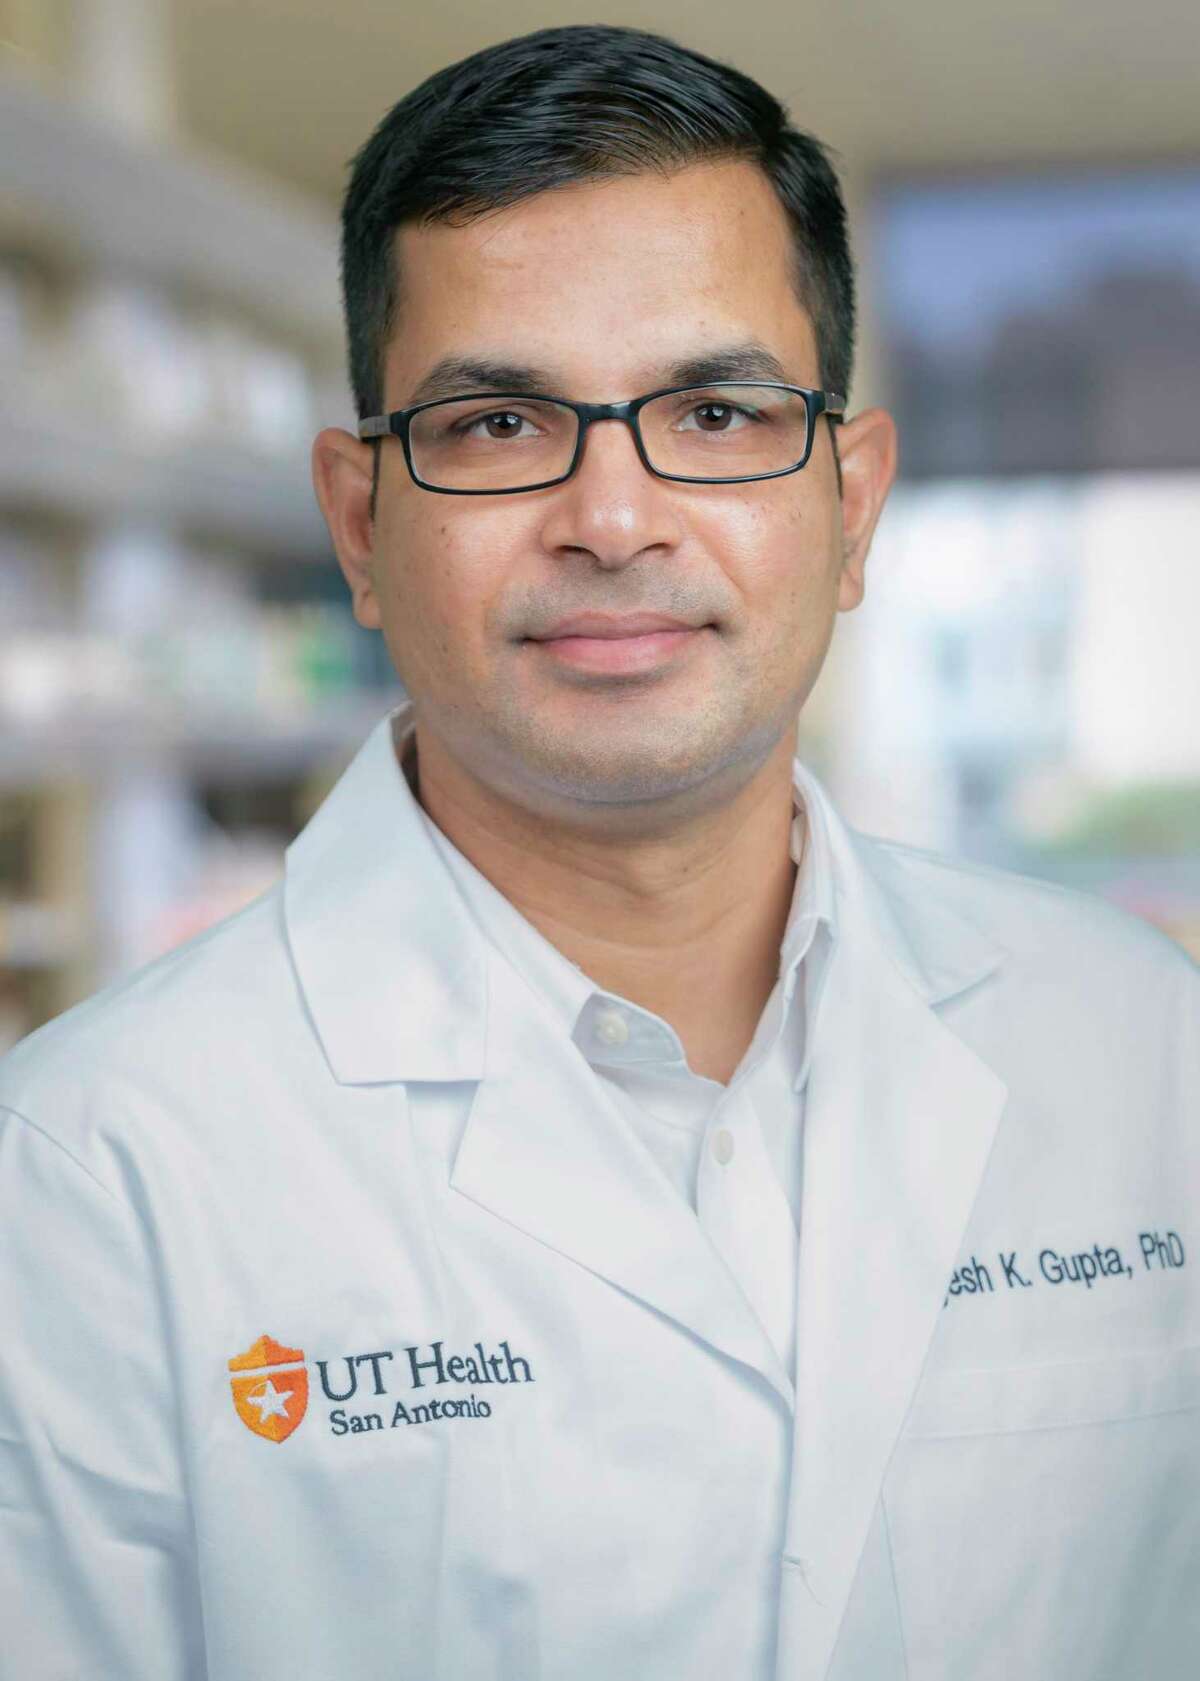 Yogesh Gupta is an assistant professor of biochemistry and structural biology at UT Health San Antonio who is leading a research team studying how the coronavirus mimics the human messenger RNA in some individuals to hide from their immune system and multiply in their body after infection.